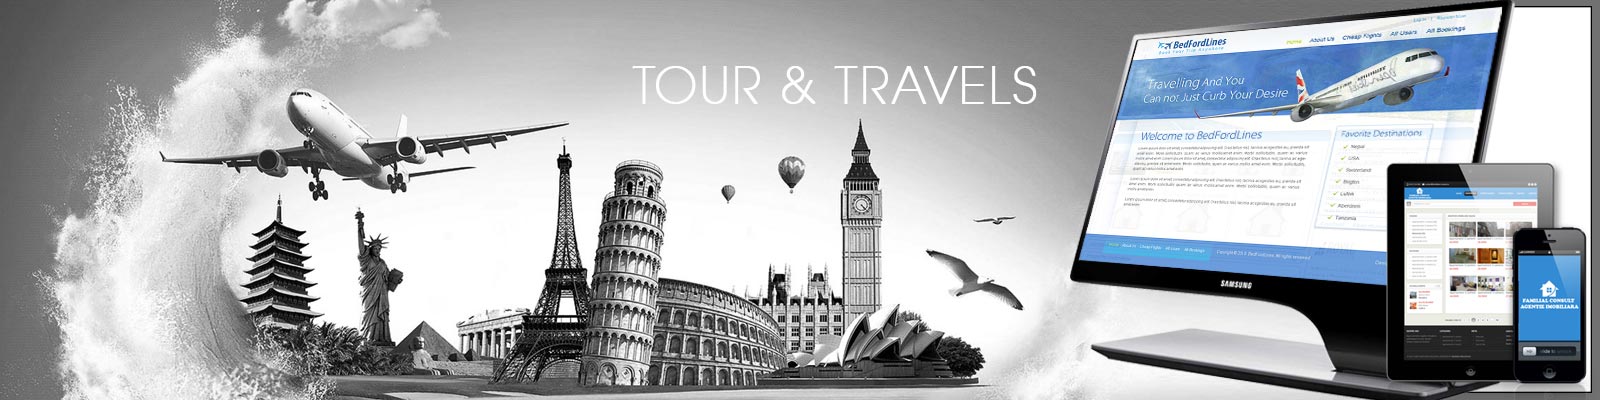 tours and travel solutions	